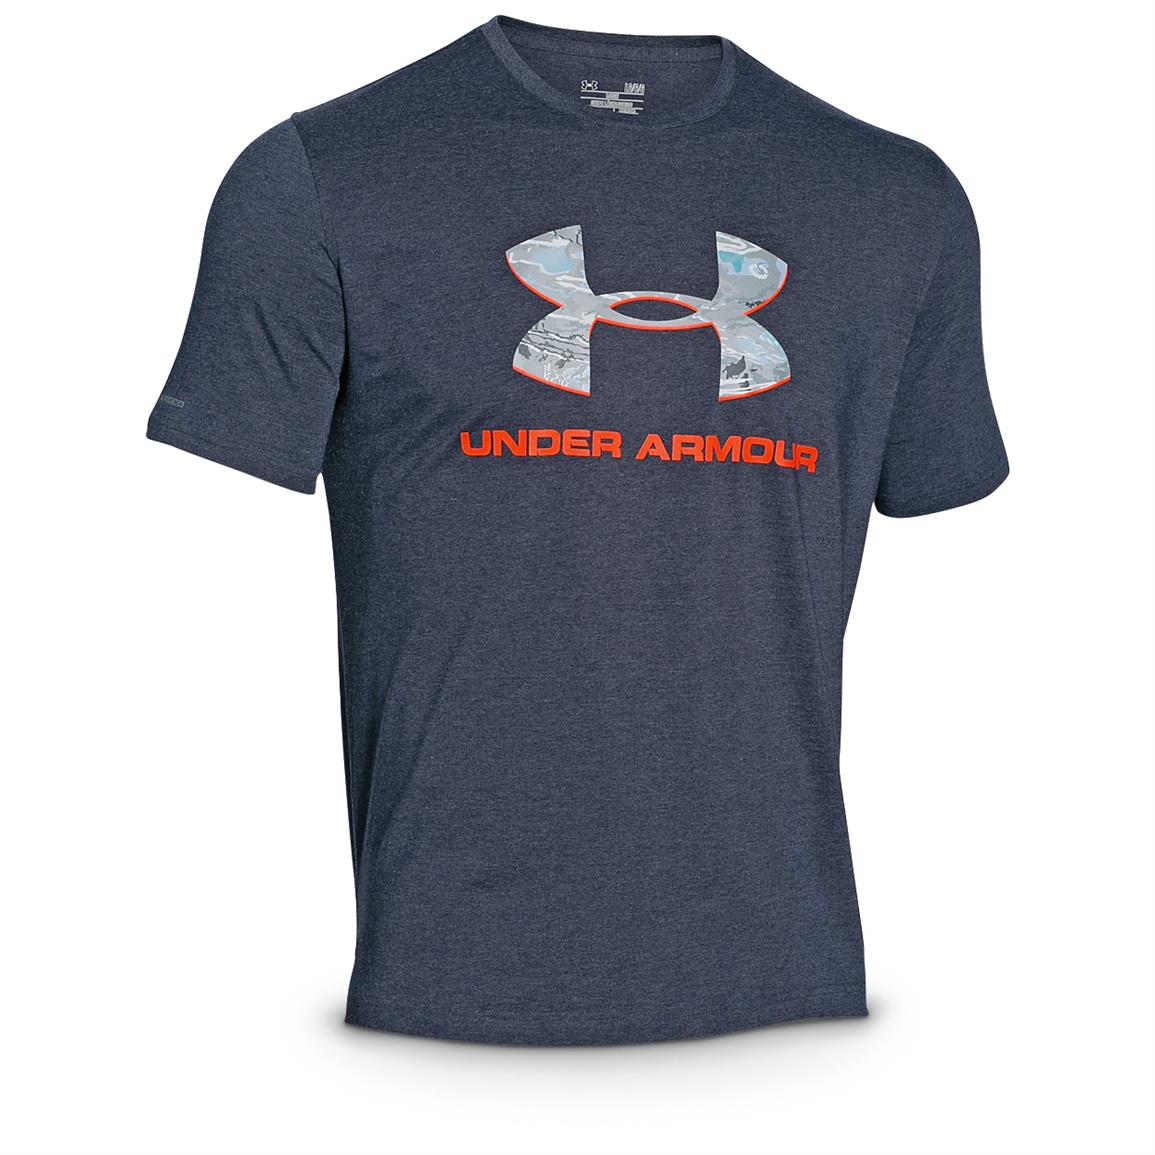 Israel under armour liverpool t shirt, Blouse neck design 2019 latest images, north face half dome t shirt. 